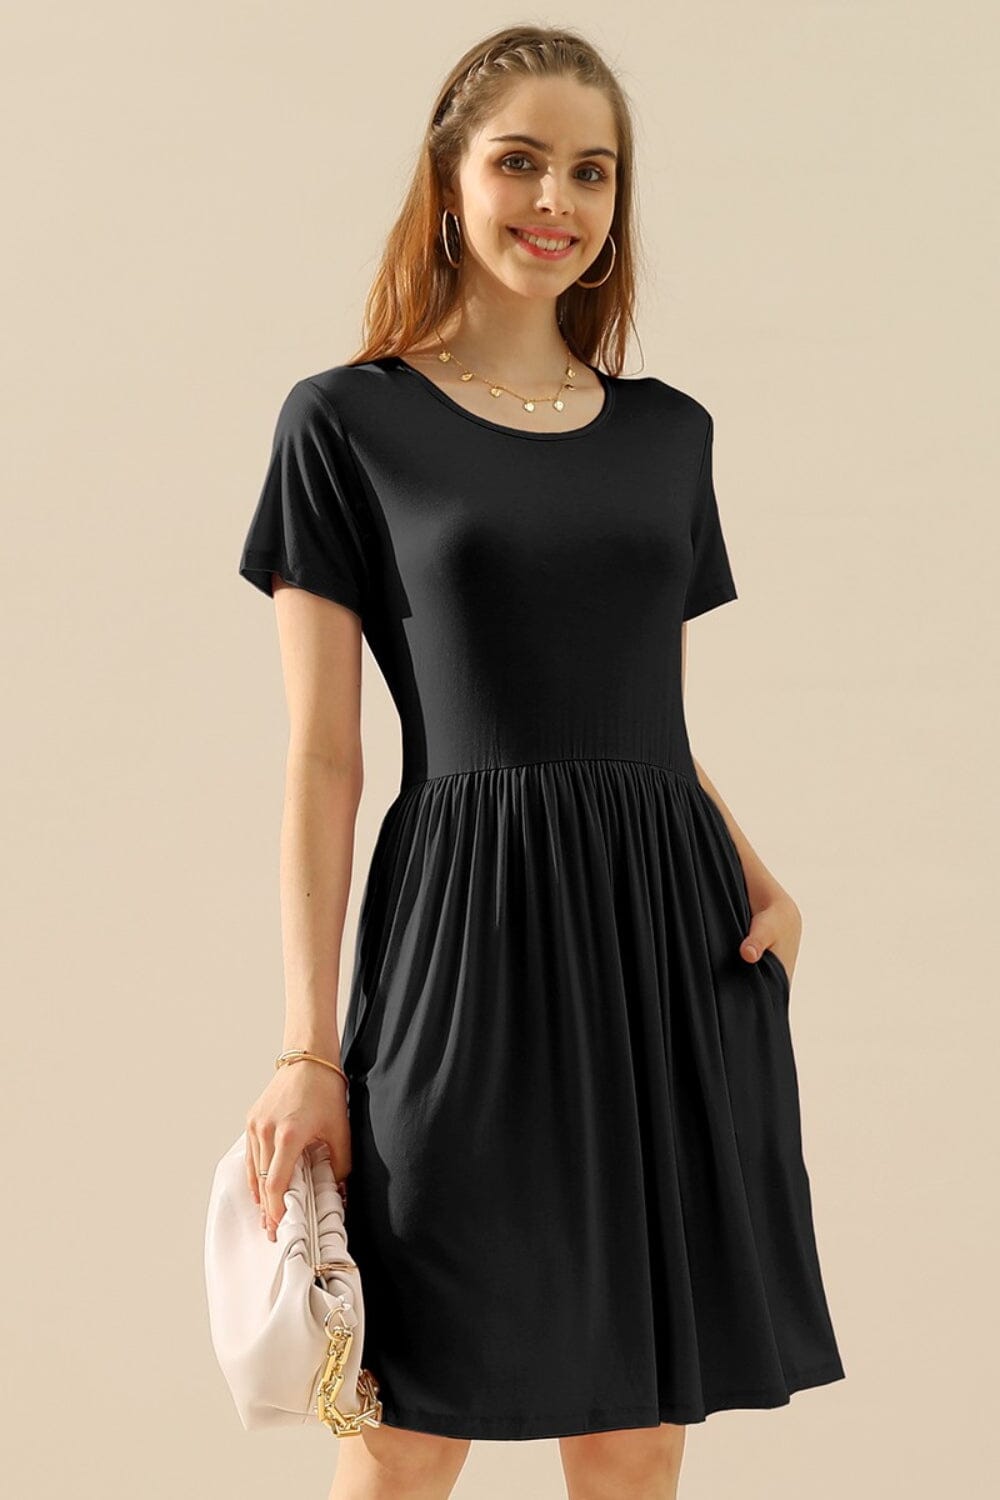 Ninexis Round Neck Ruched Dress with Pockets Dresses jehouze BLACK S 